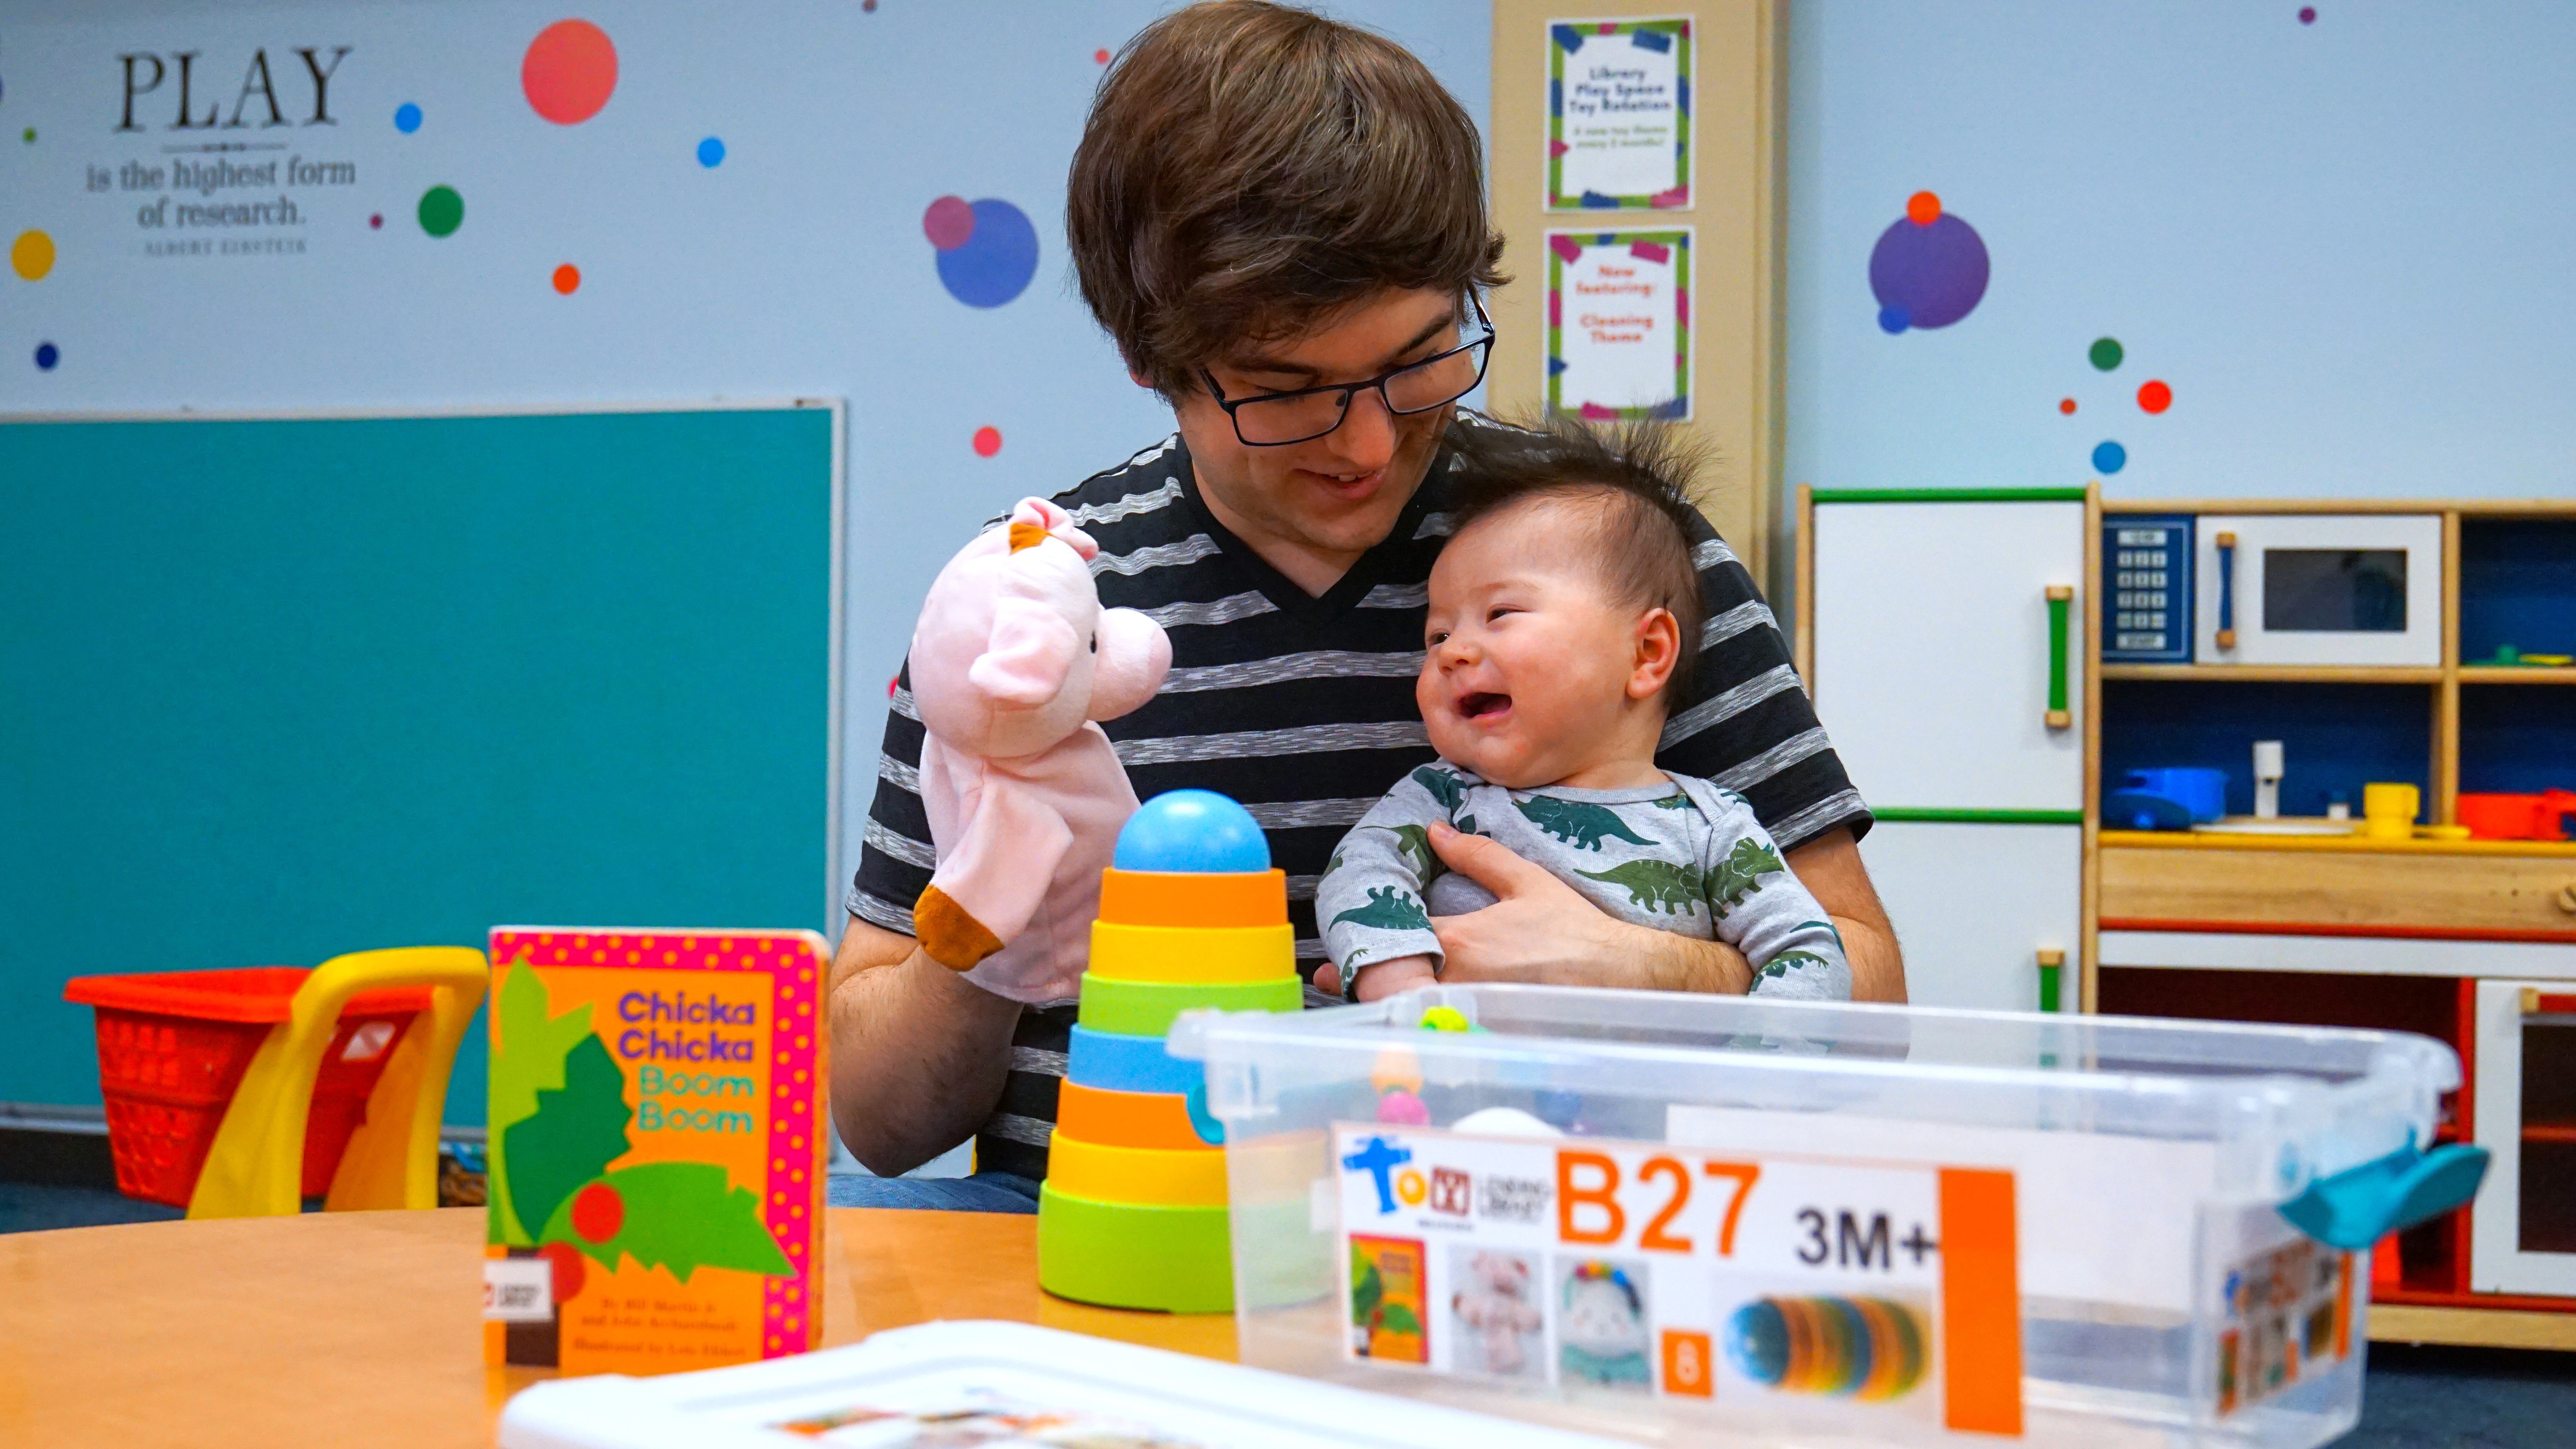 In the Downtown Library's play room, a father makes his baby laugh with a hand puppet. An open toy box and a board book are on the table in front of them.